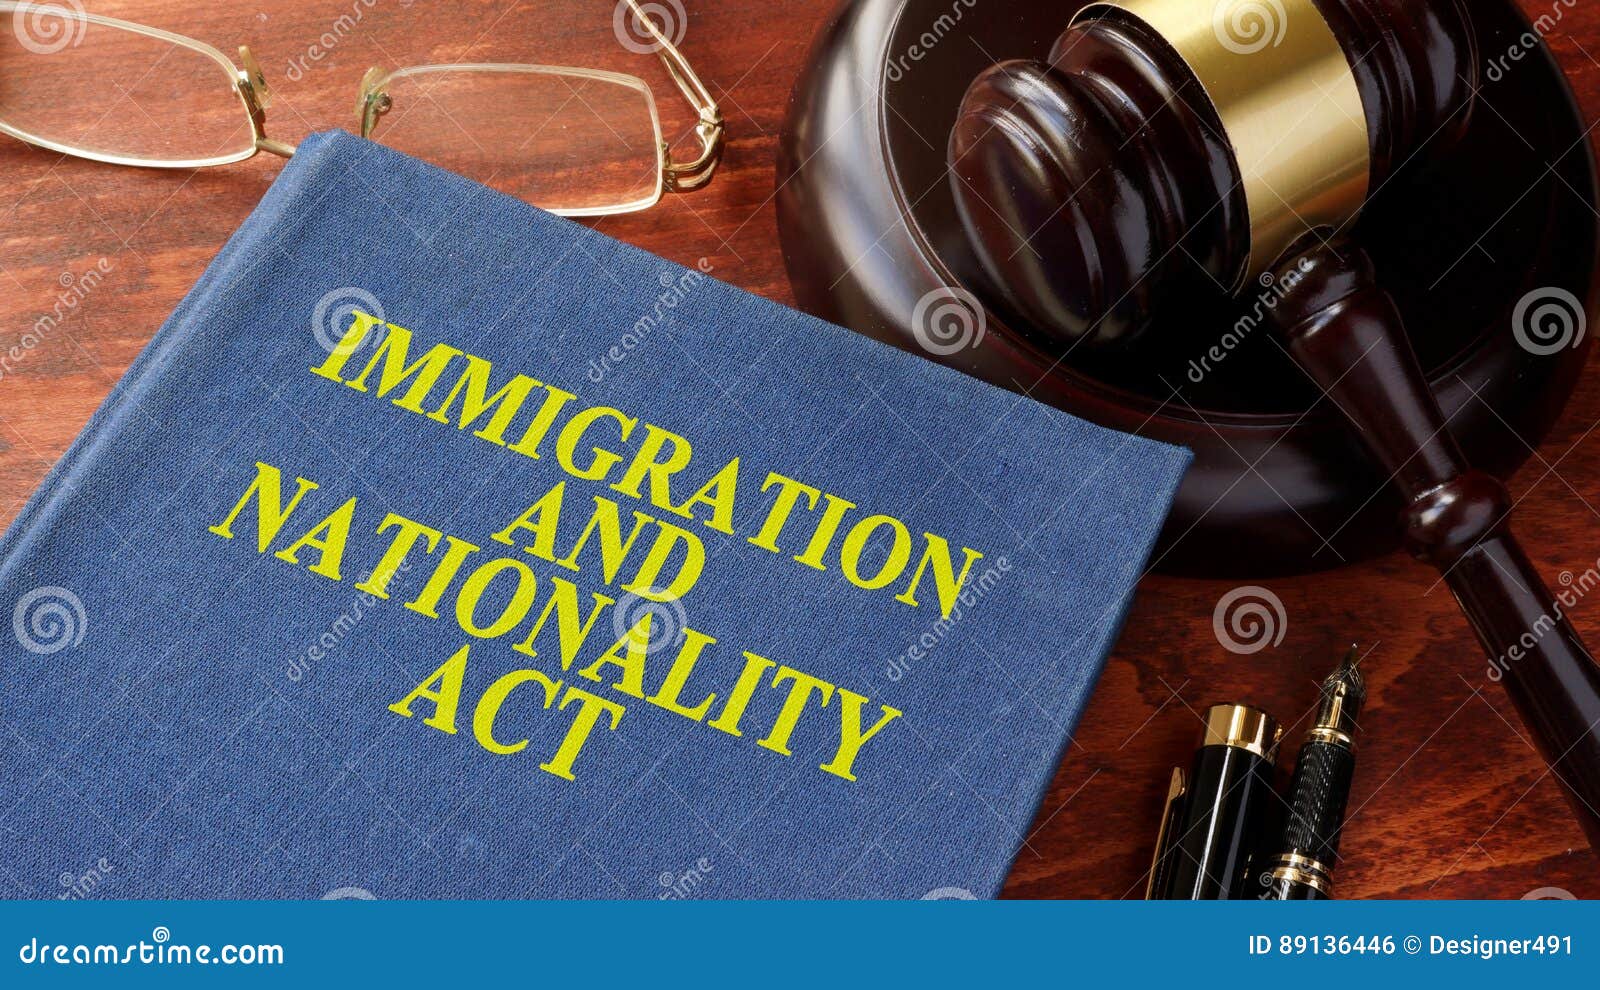 immigration and nationality act ina.